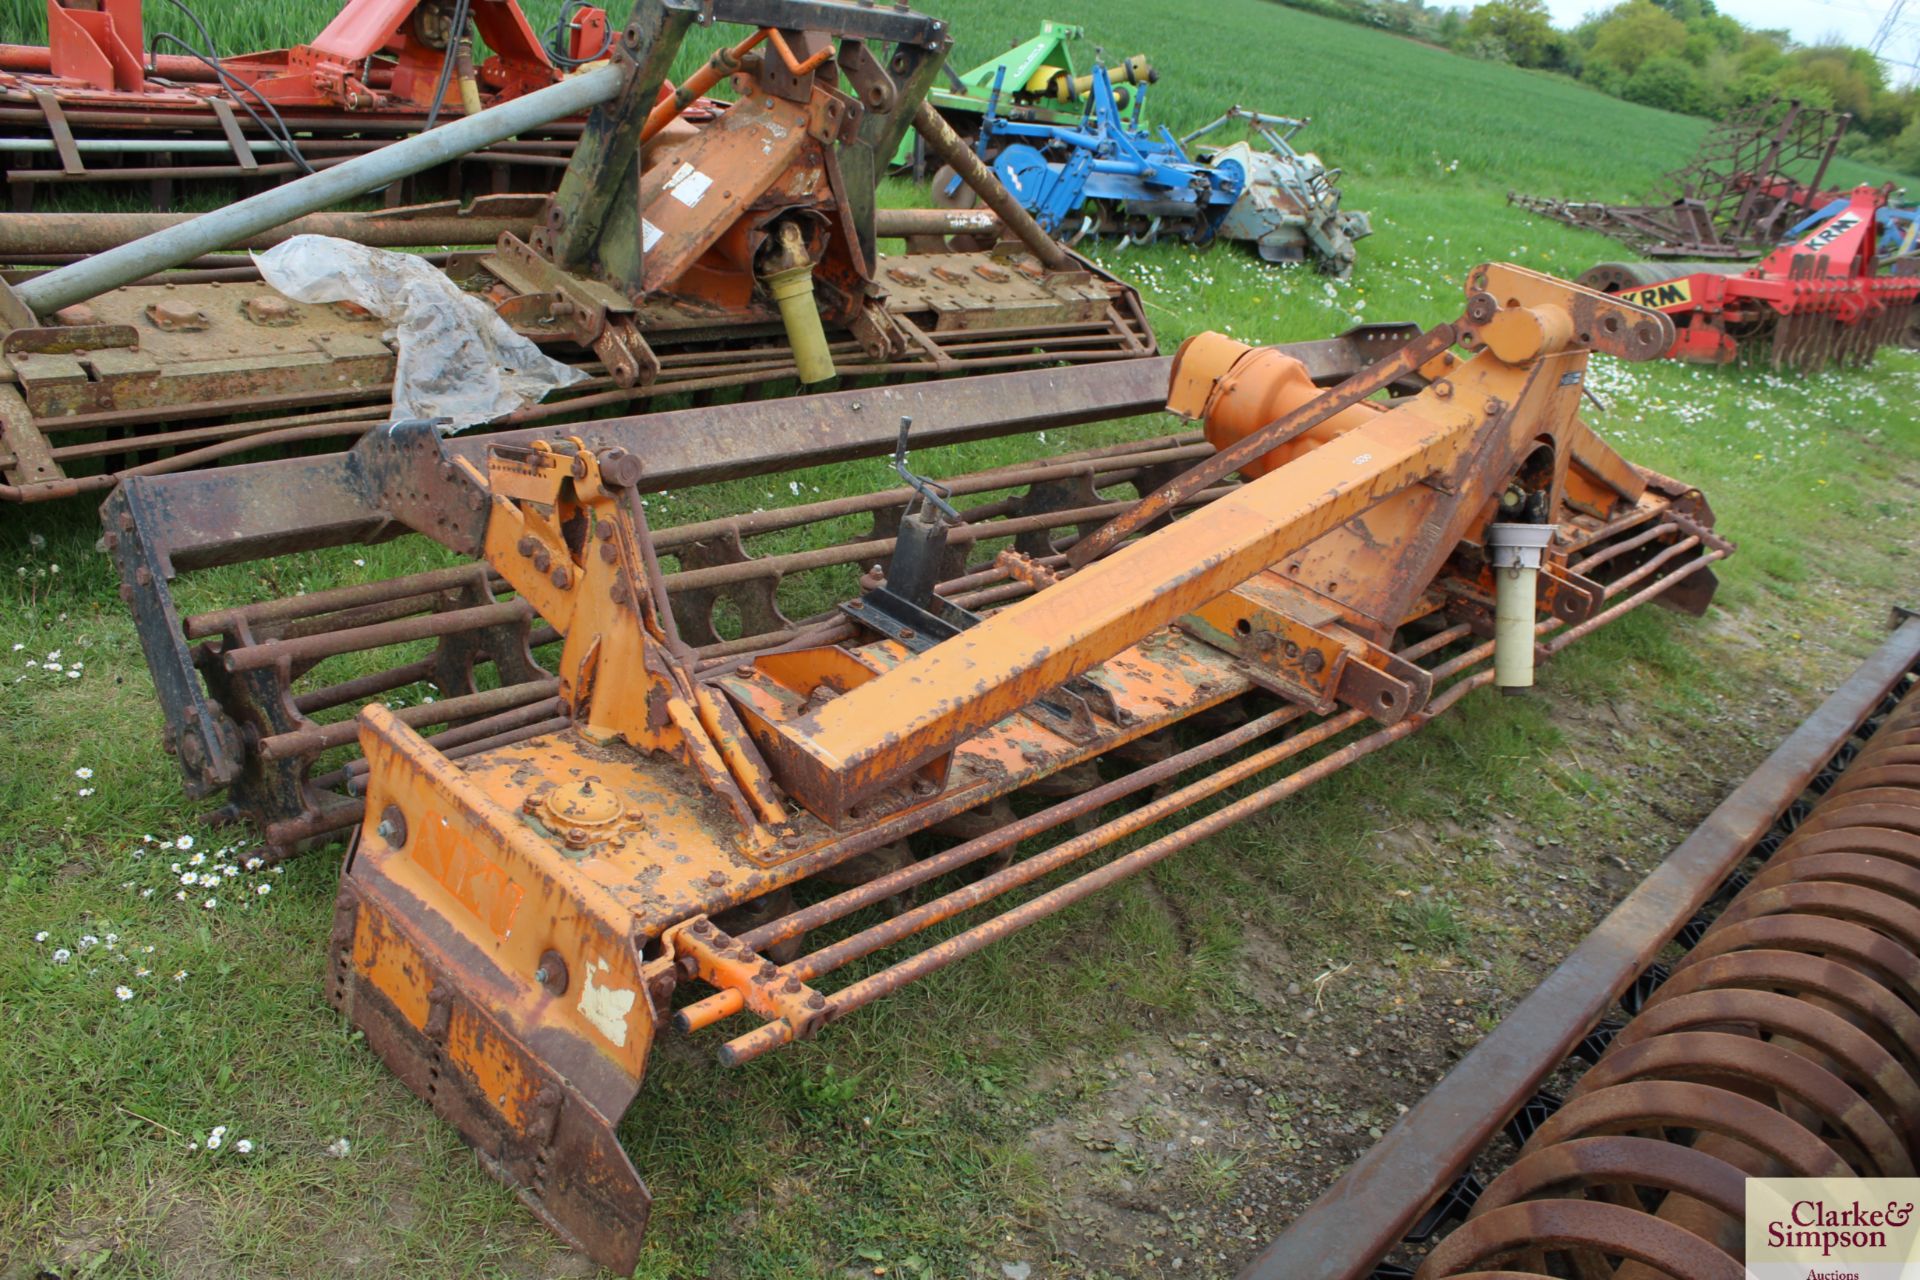 SKH (Feraboli) 4m power harrow. Serial number 11753. With crumbler. Owned from new. V